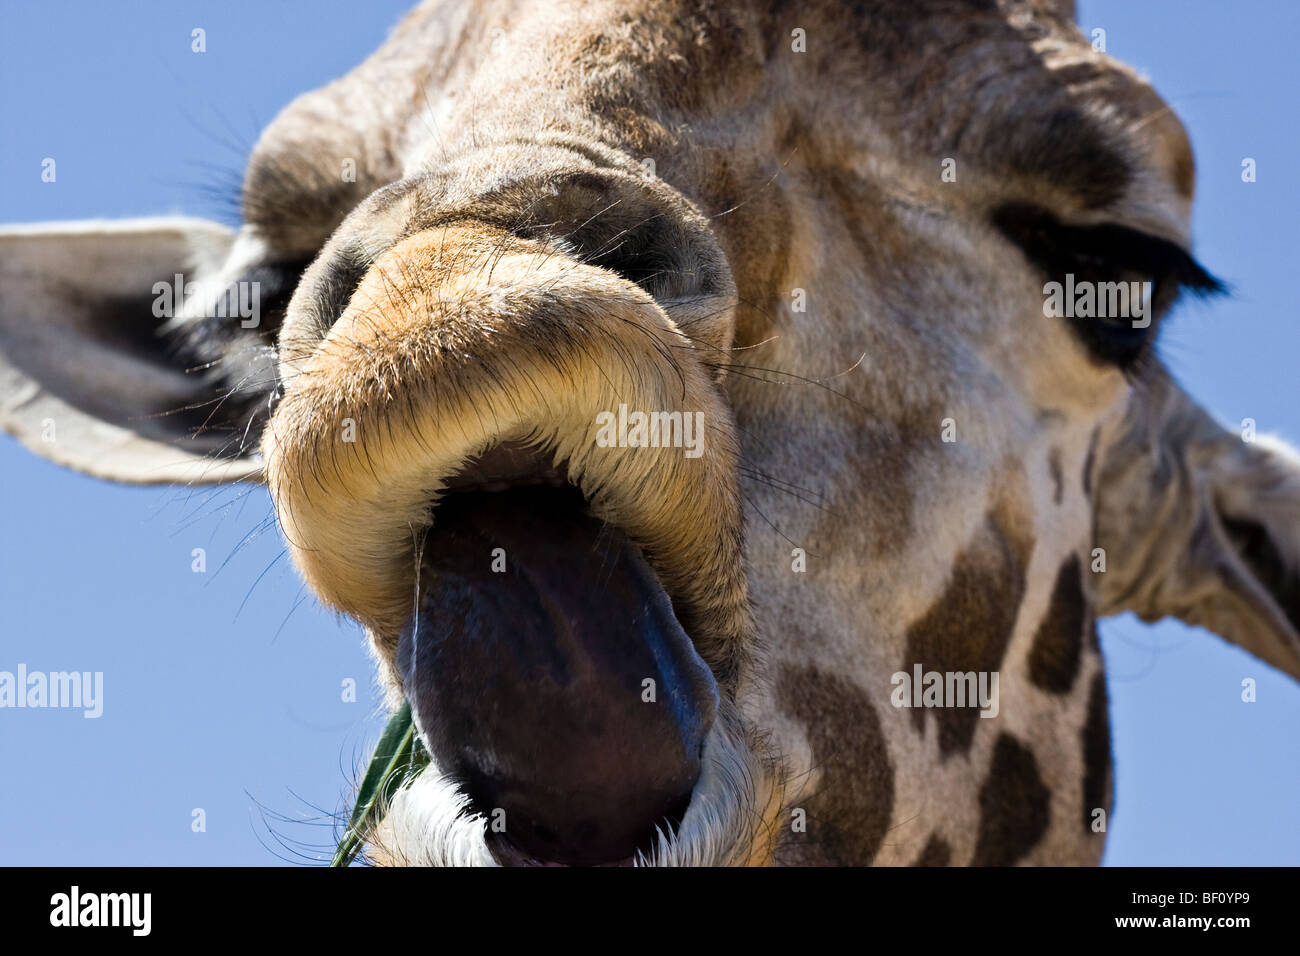 A close-up of a "Giraffe" sticking his tongue out. Stock Photo